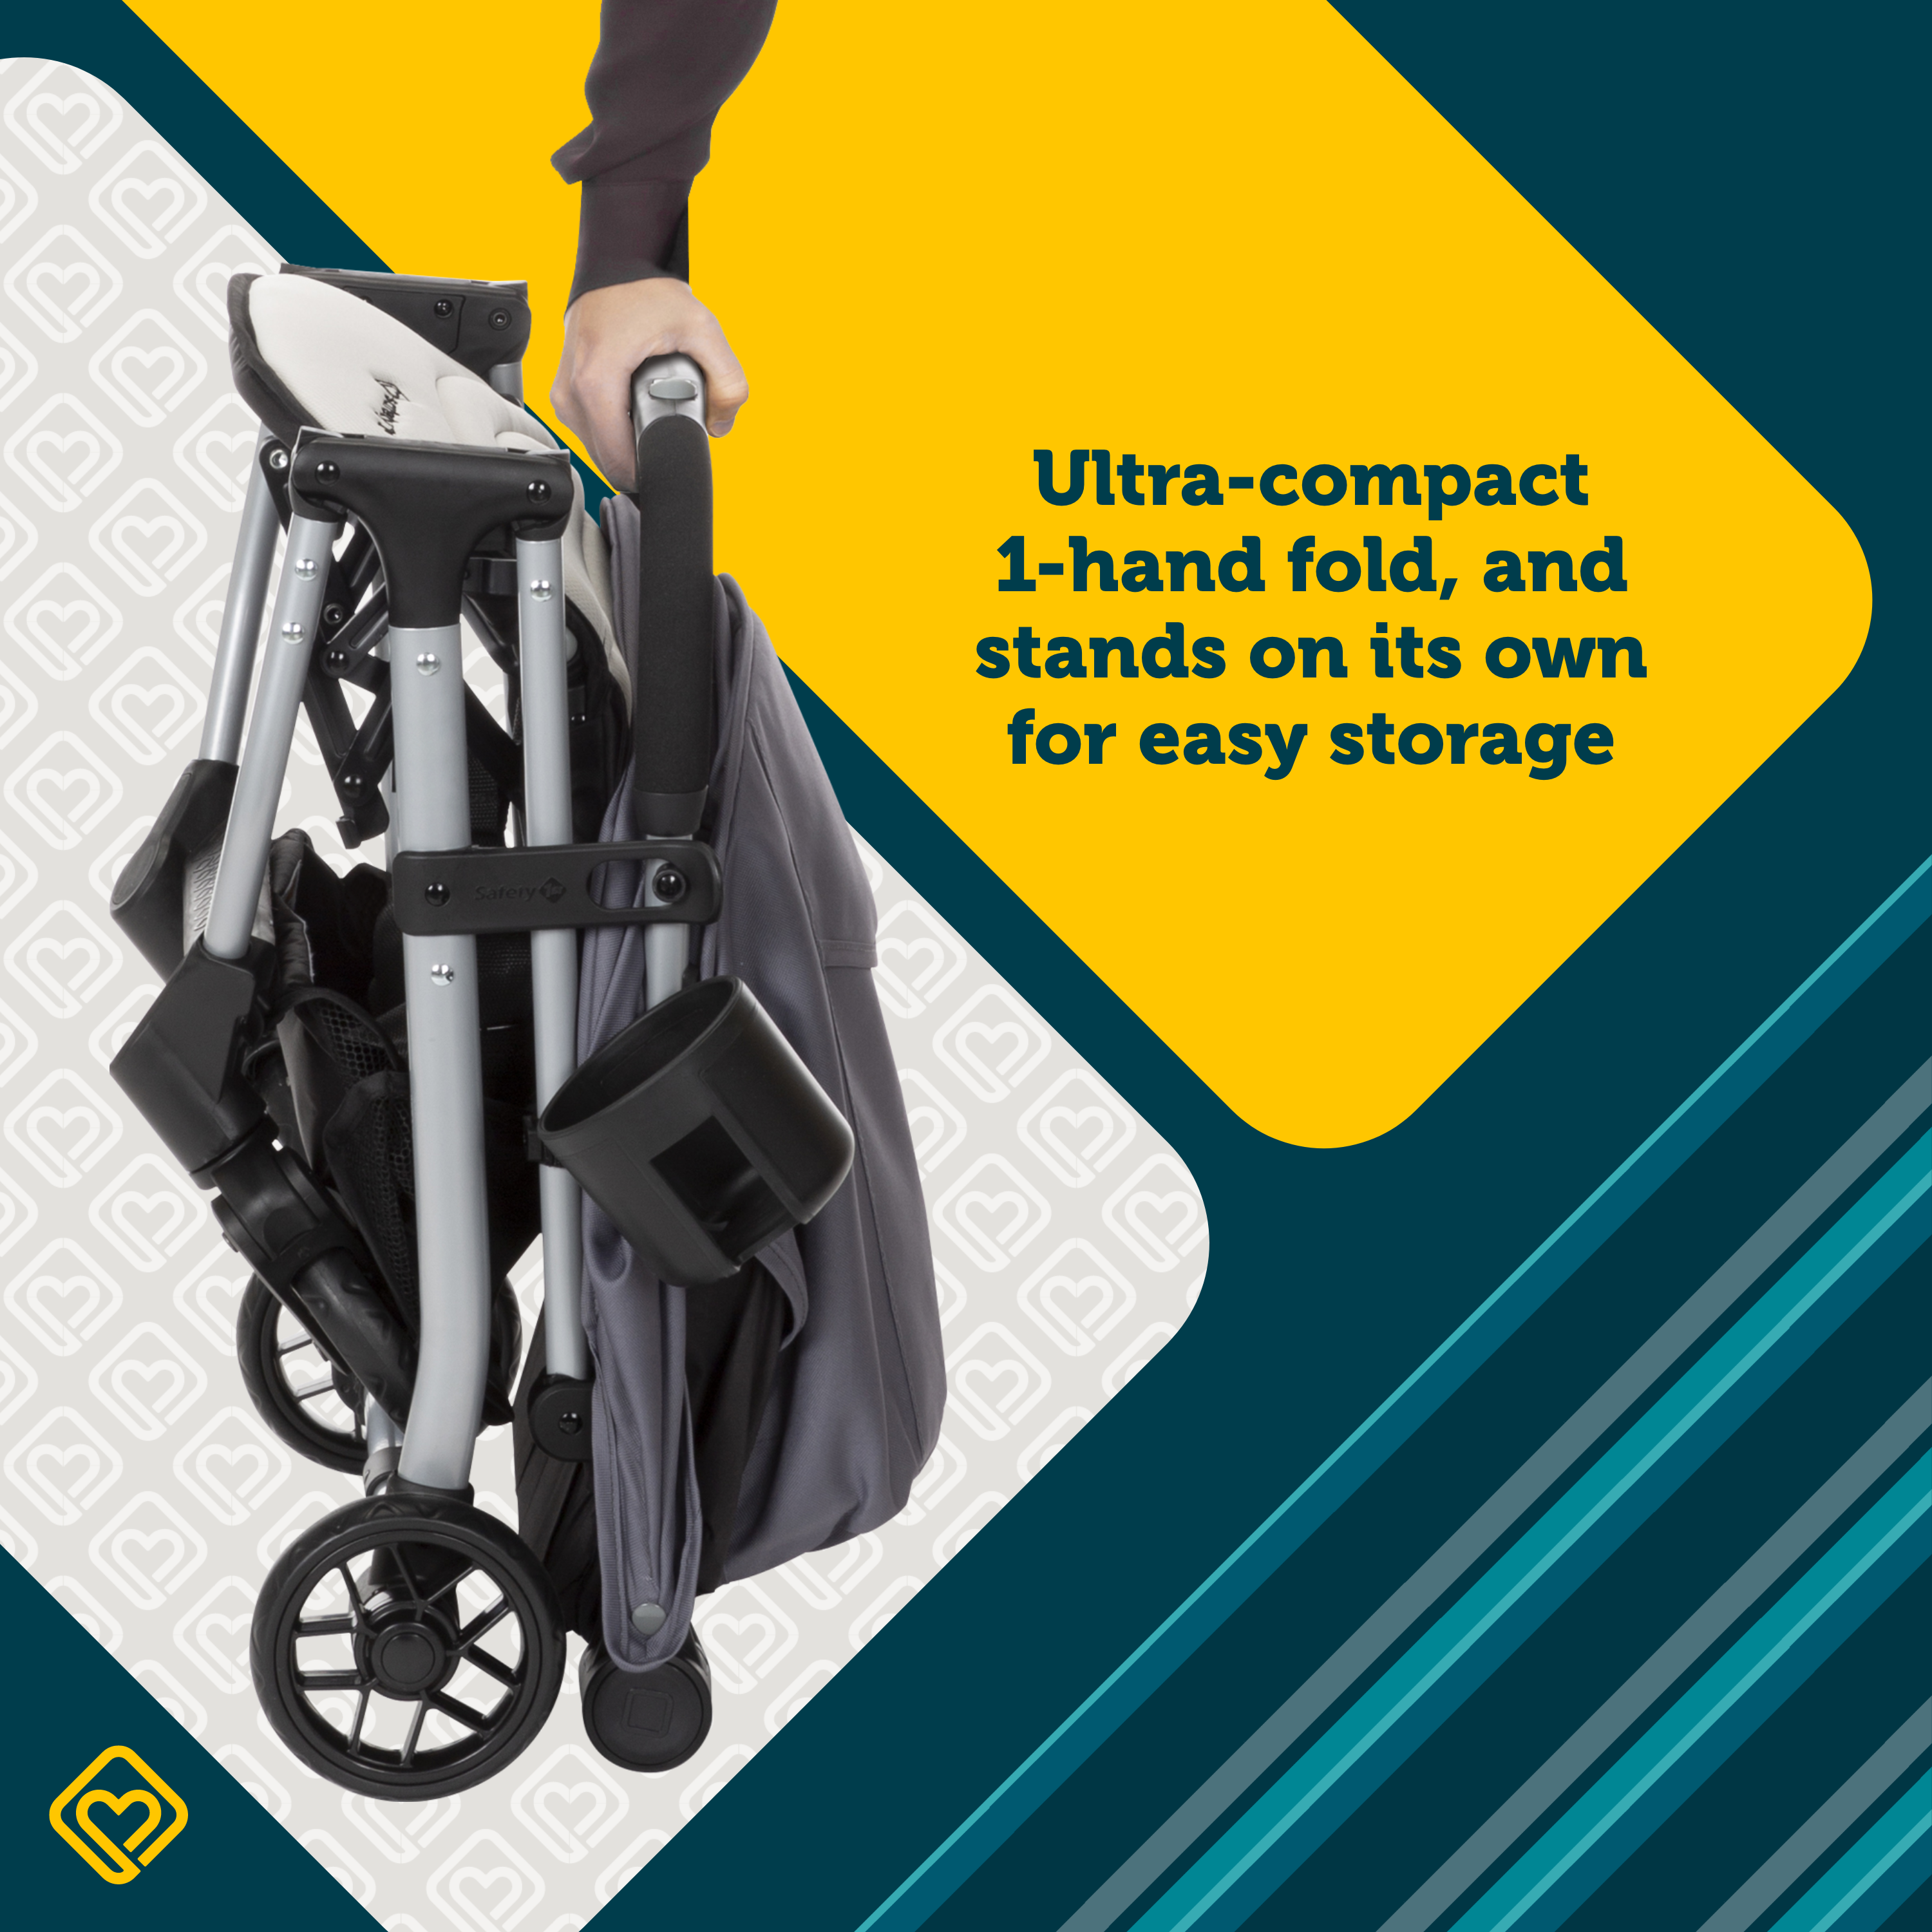 Easy-Fold Compact Stroller - ultra-compact 1-hand fold, and stands on its own for easy storage